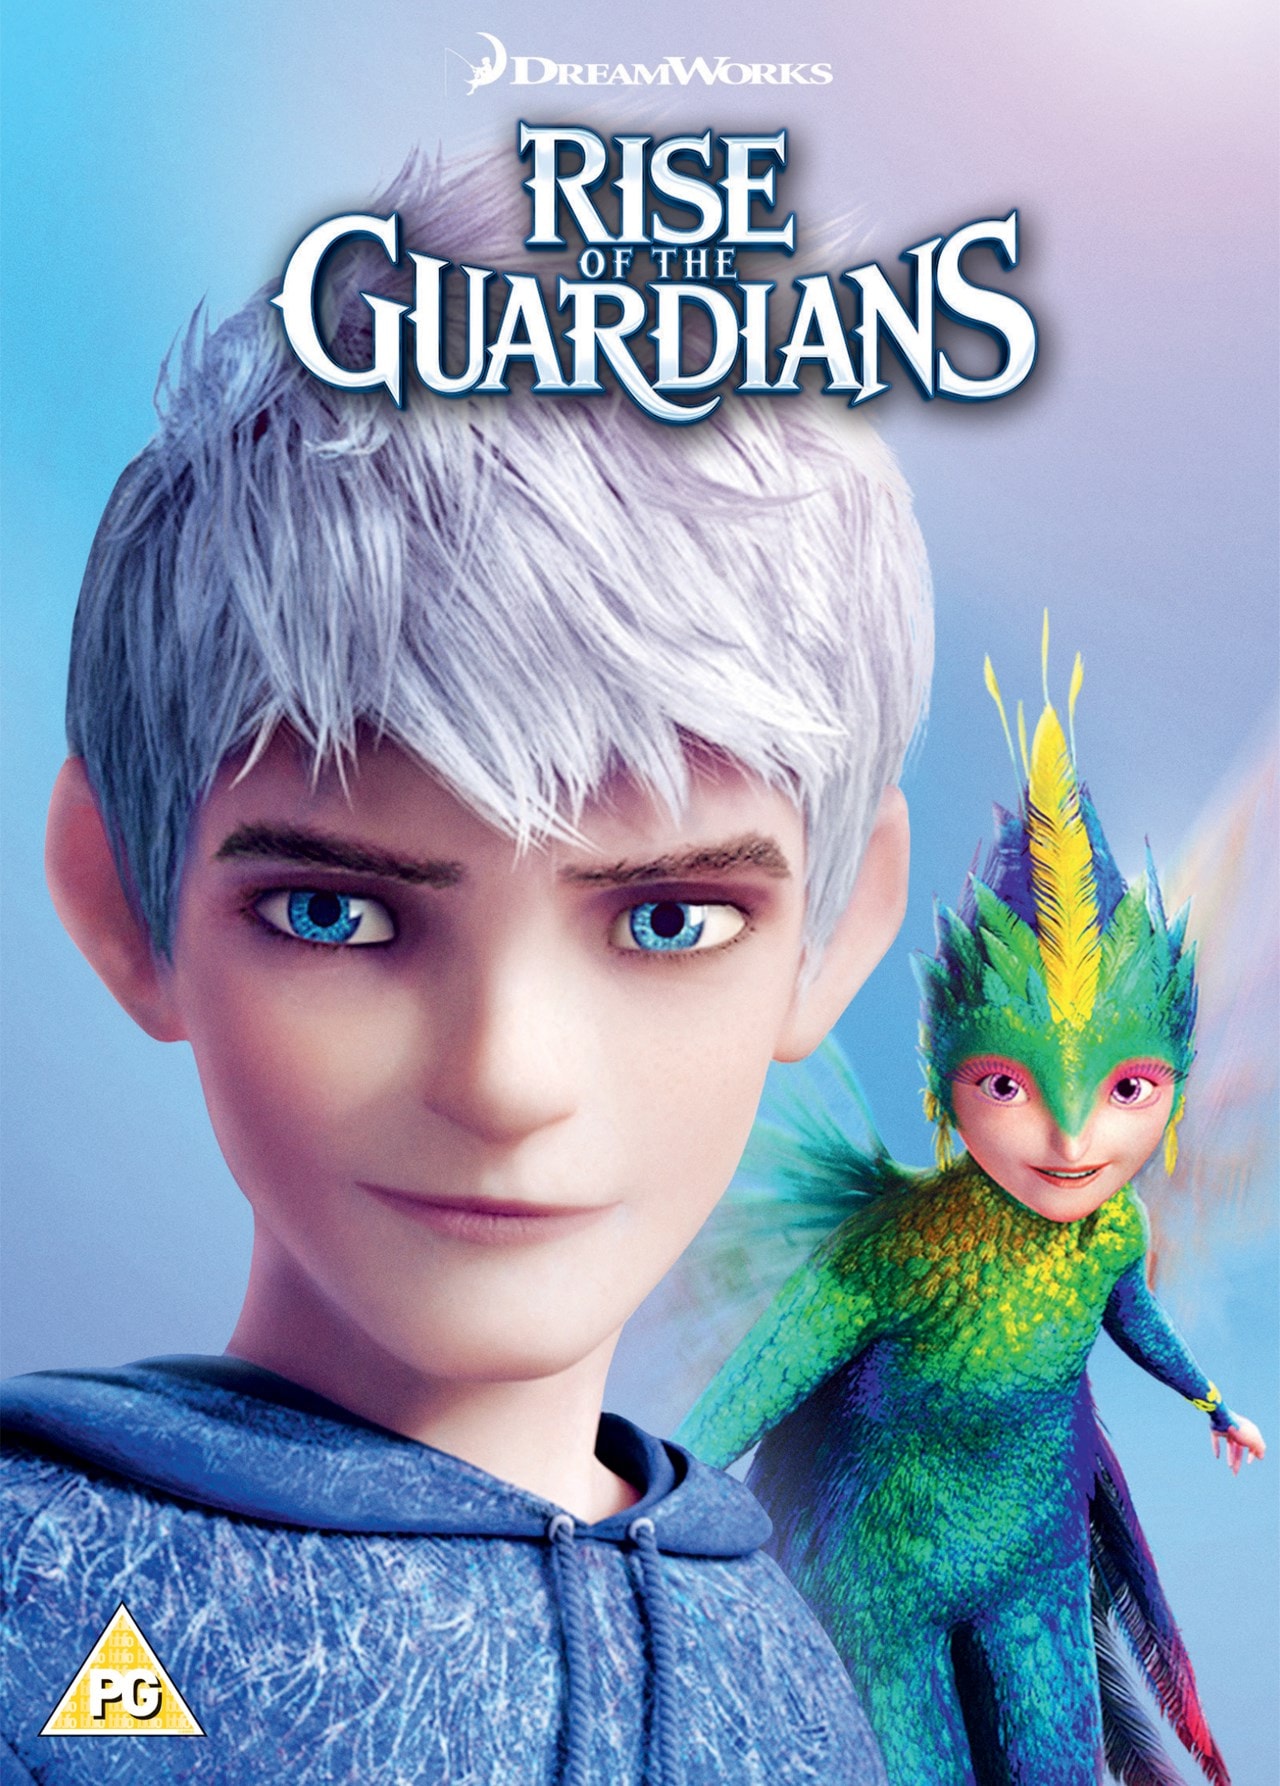 Rise of the Guardians | DVD | Free shipping over £20 | HMV ...